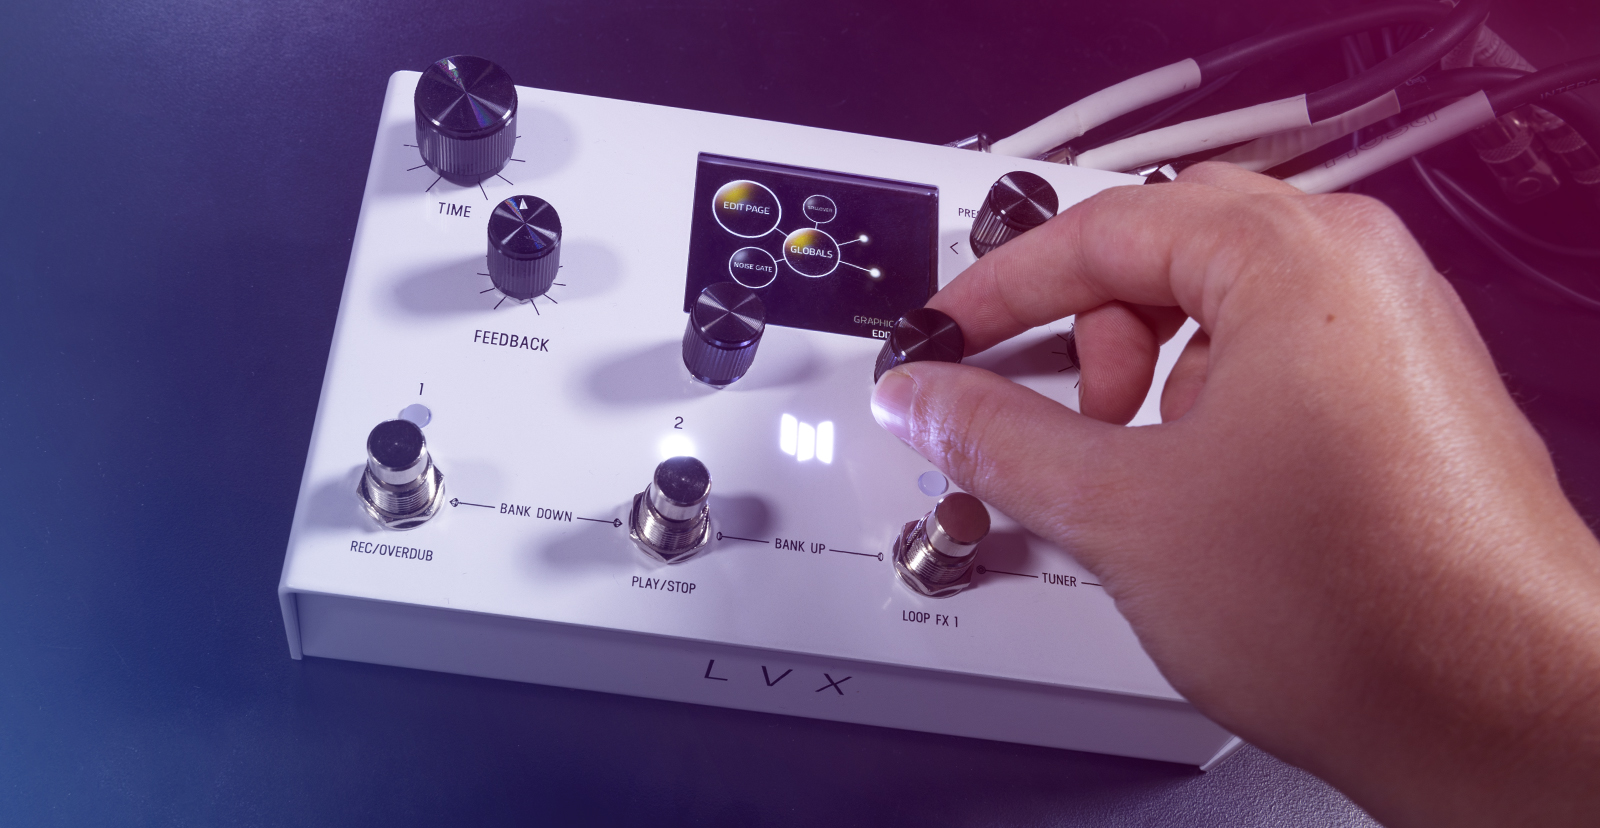 Getting Started With the Meris LVX Modular Delay System | Sweetwater